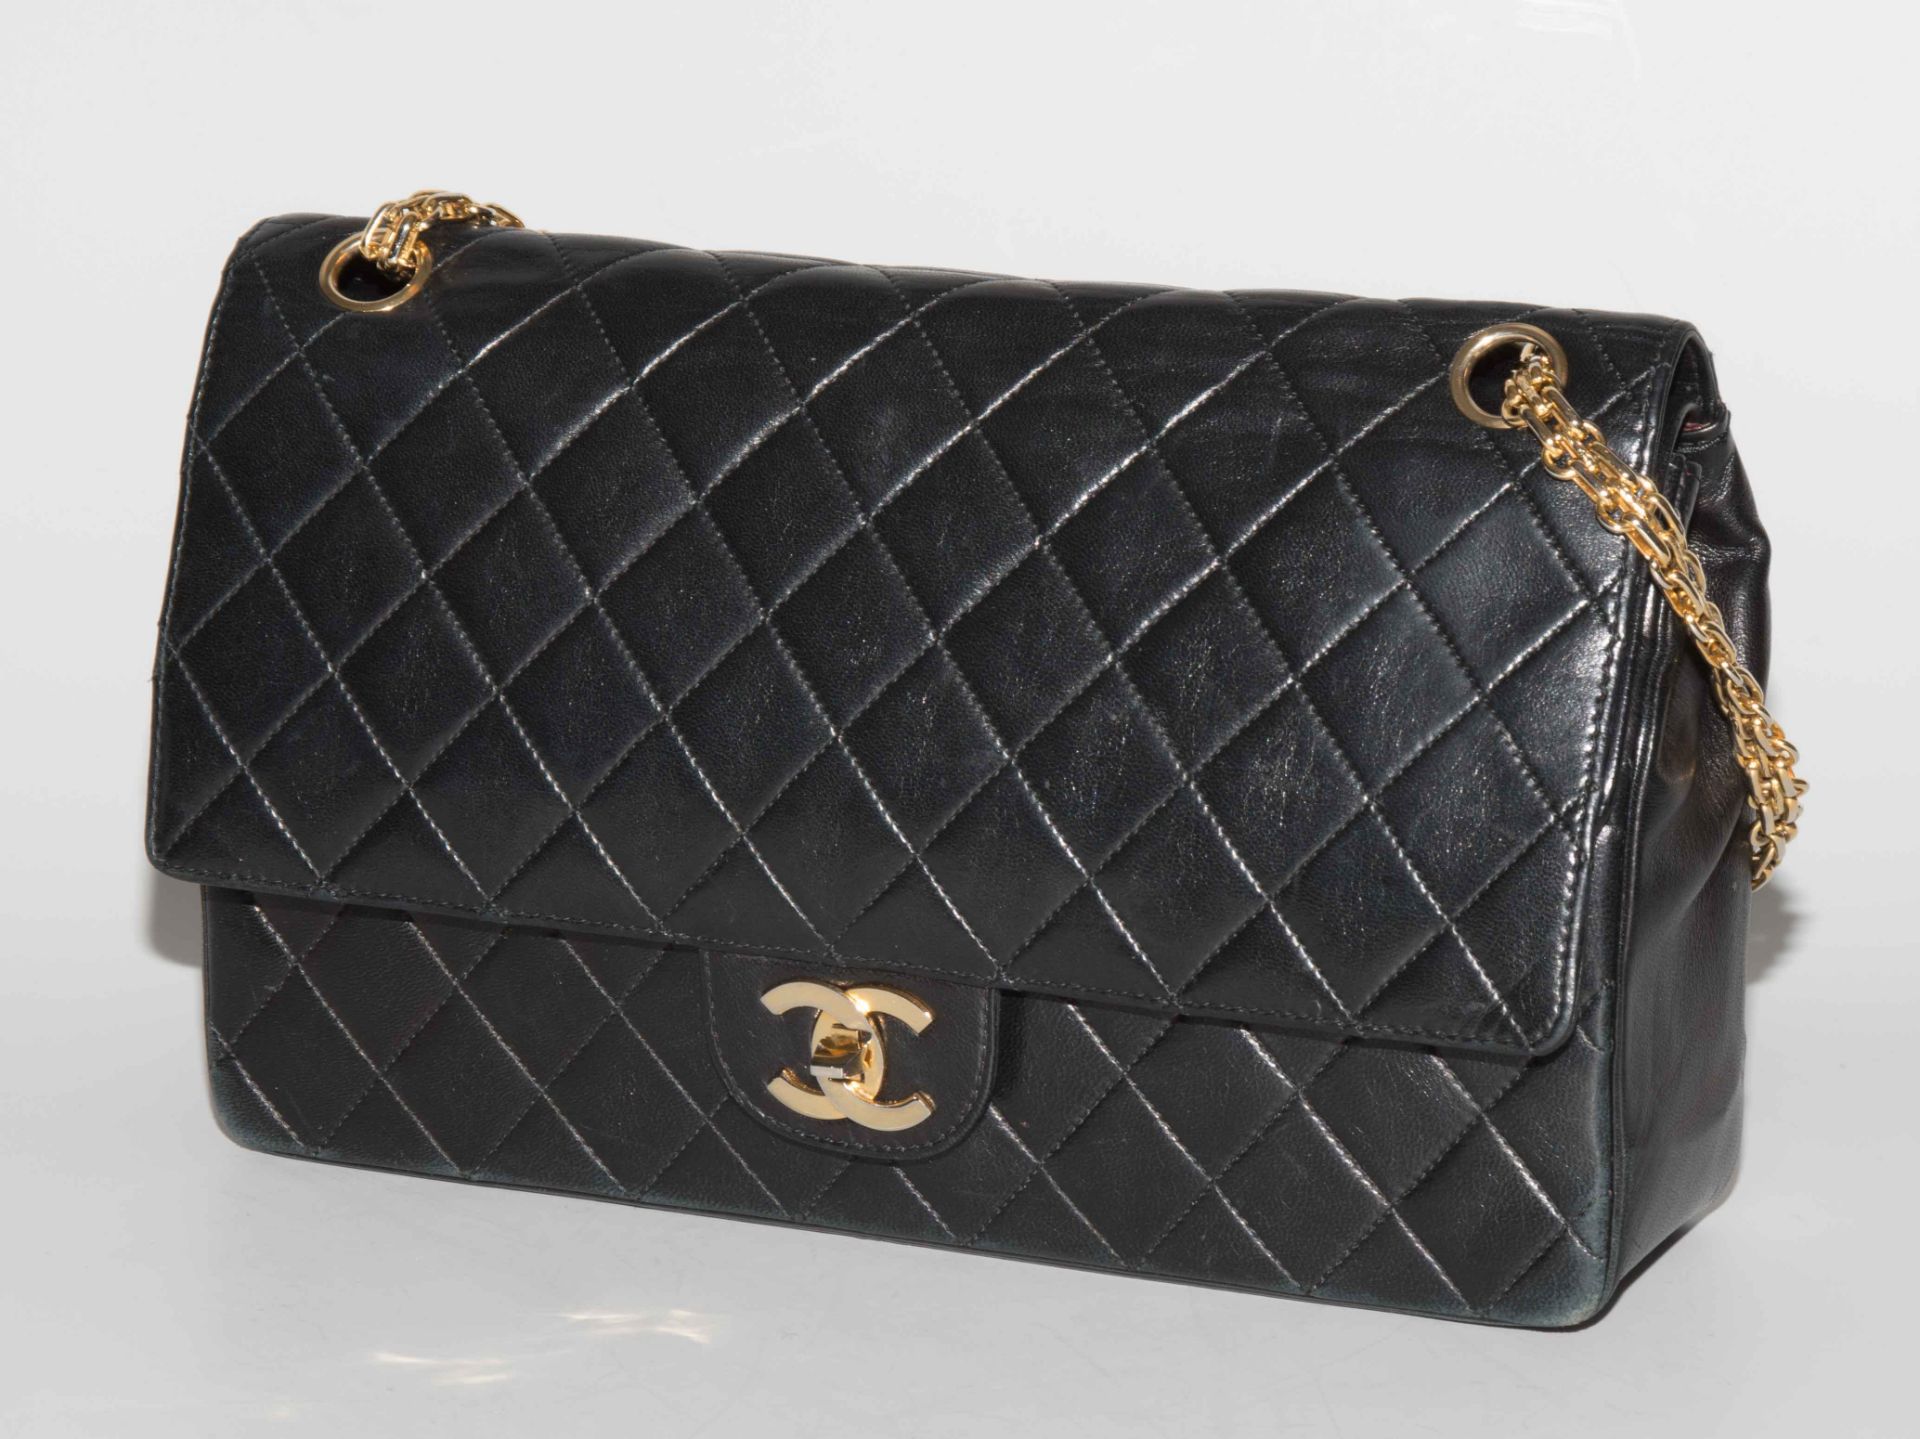 Chanel, Handtasche "Timeless" - Image 2 of 15